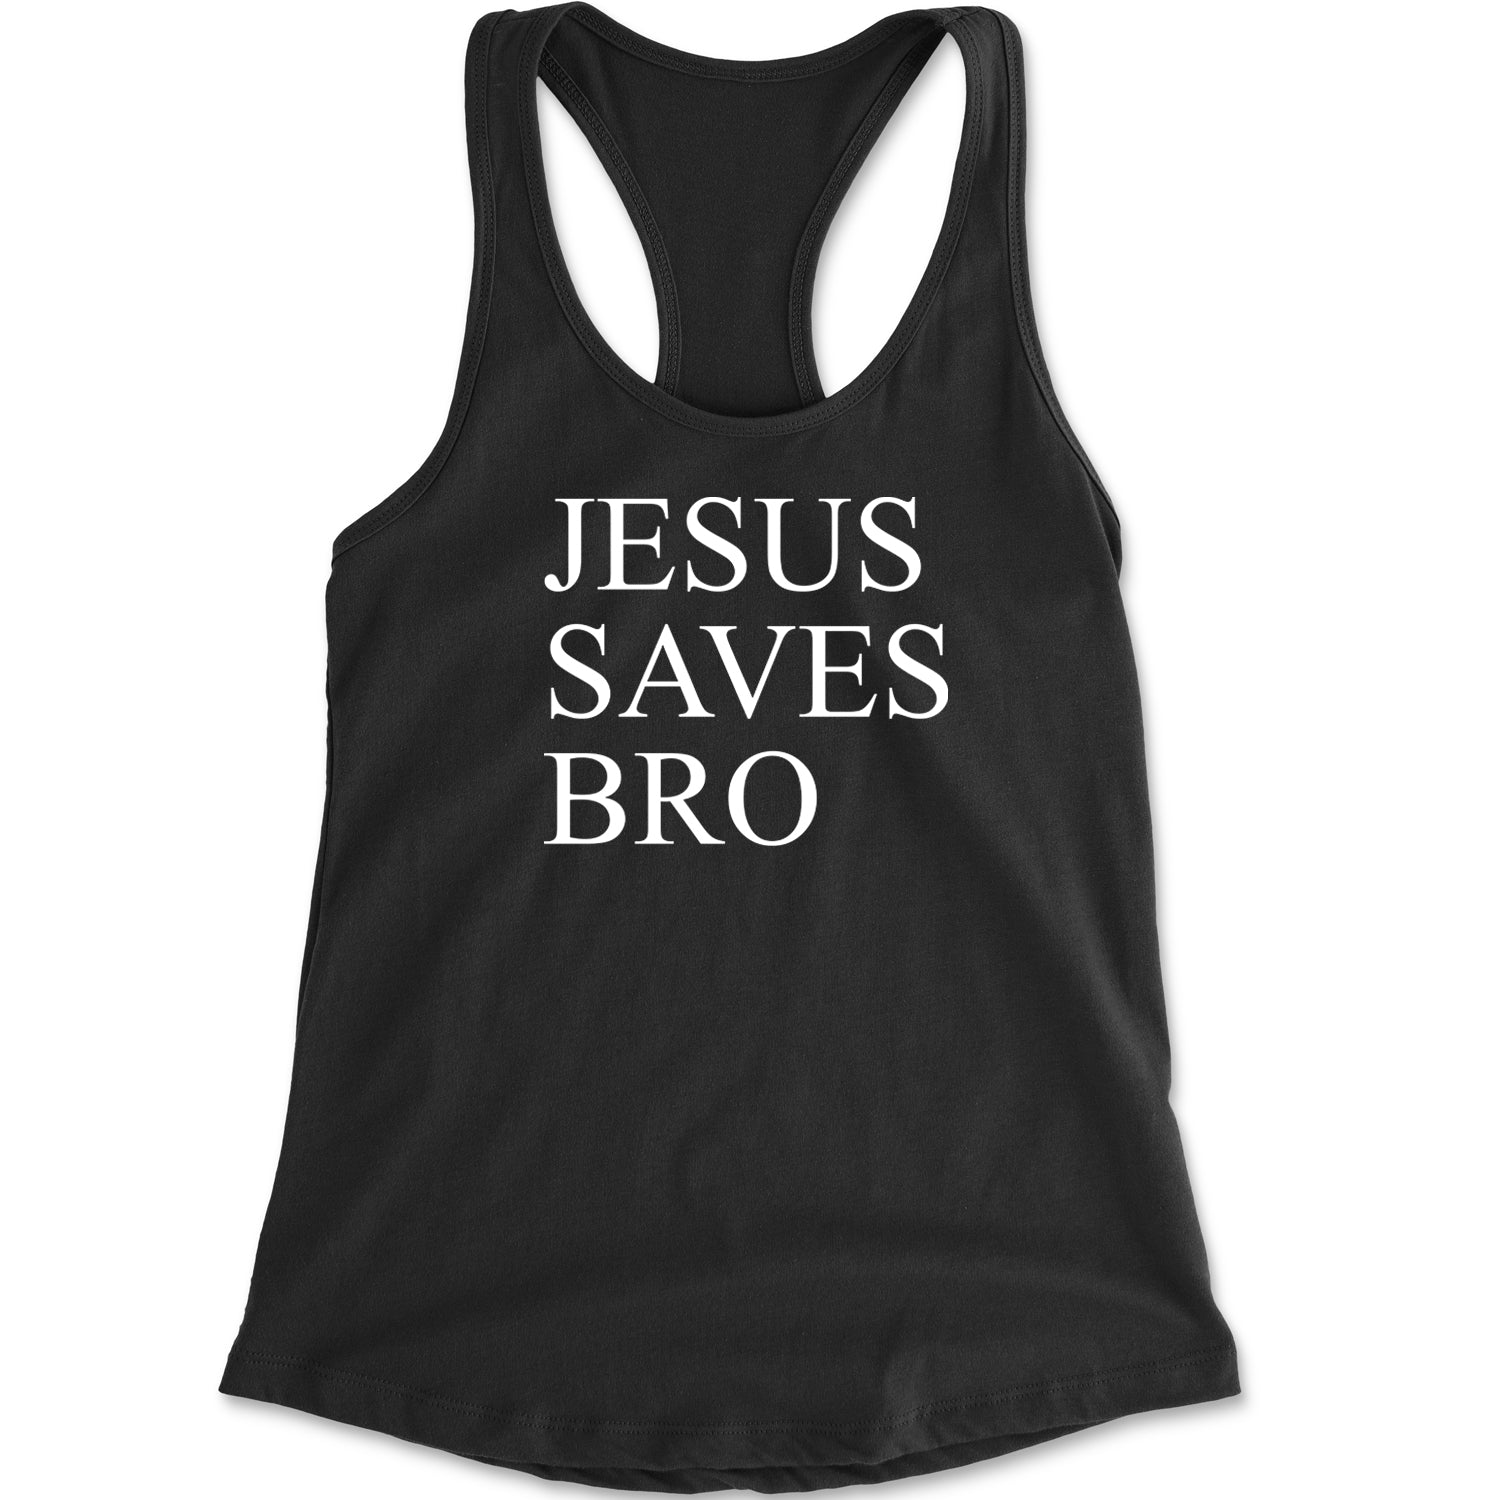 Jesus Saves Bro Racerback Tank Top for Women catholic, christian, christianity, church, jesus, religion, religuous by Expression Tees